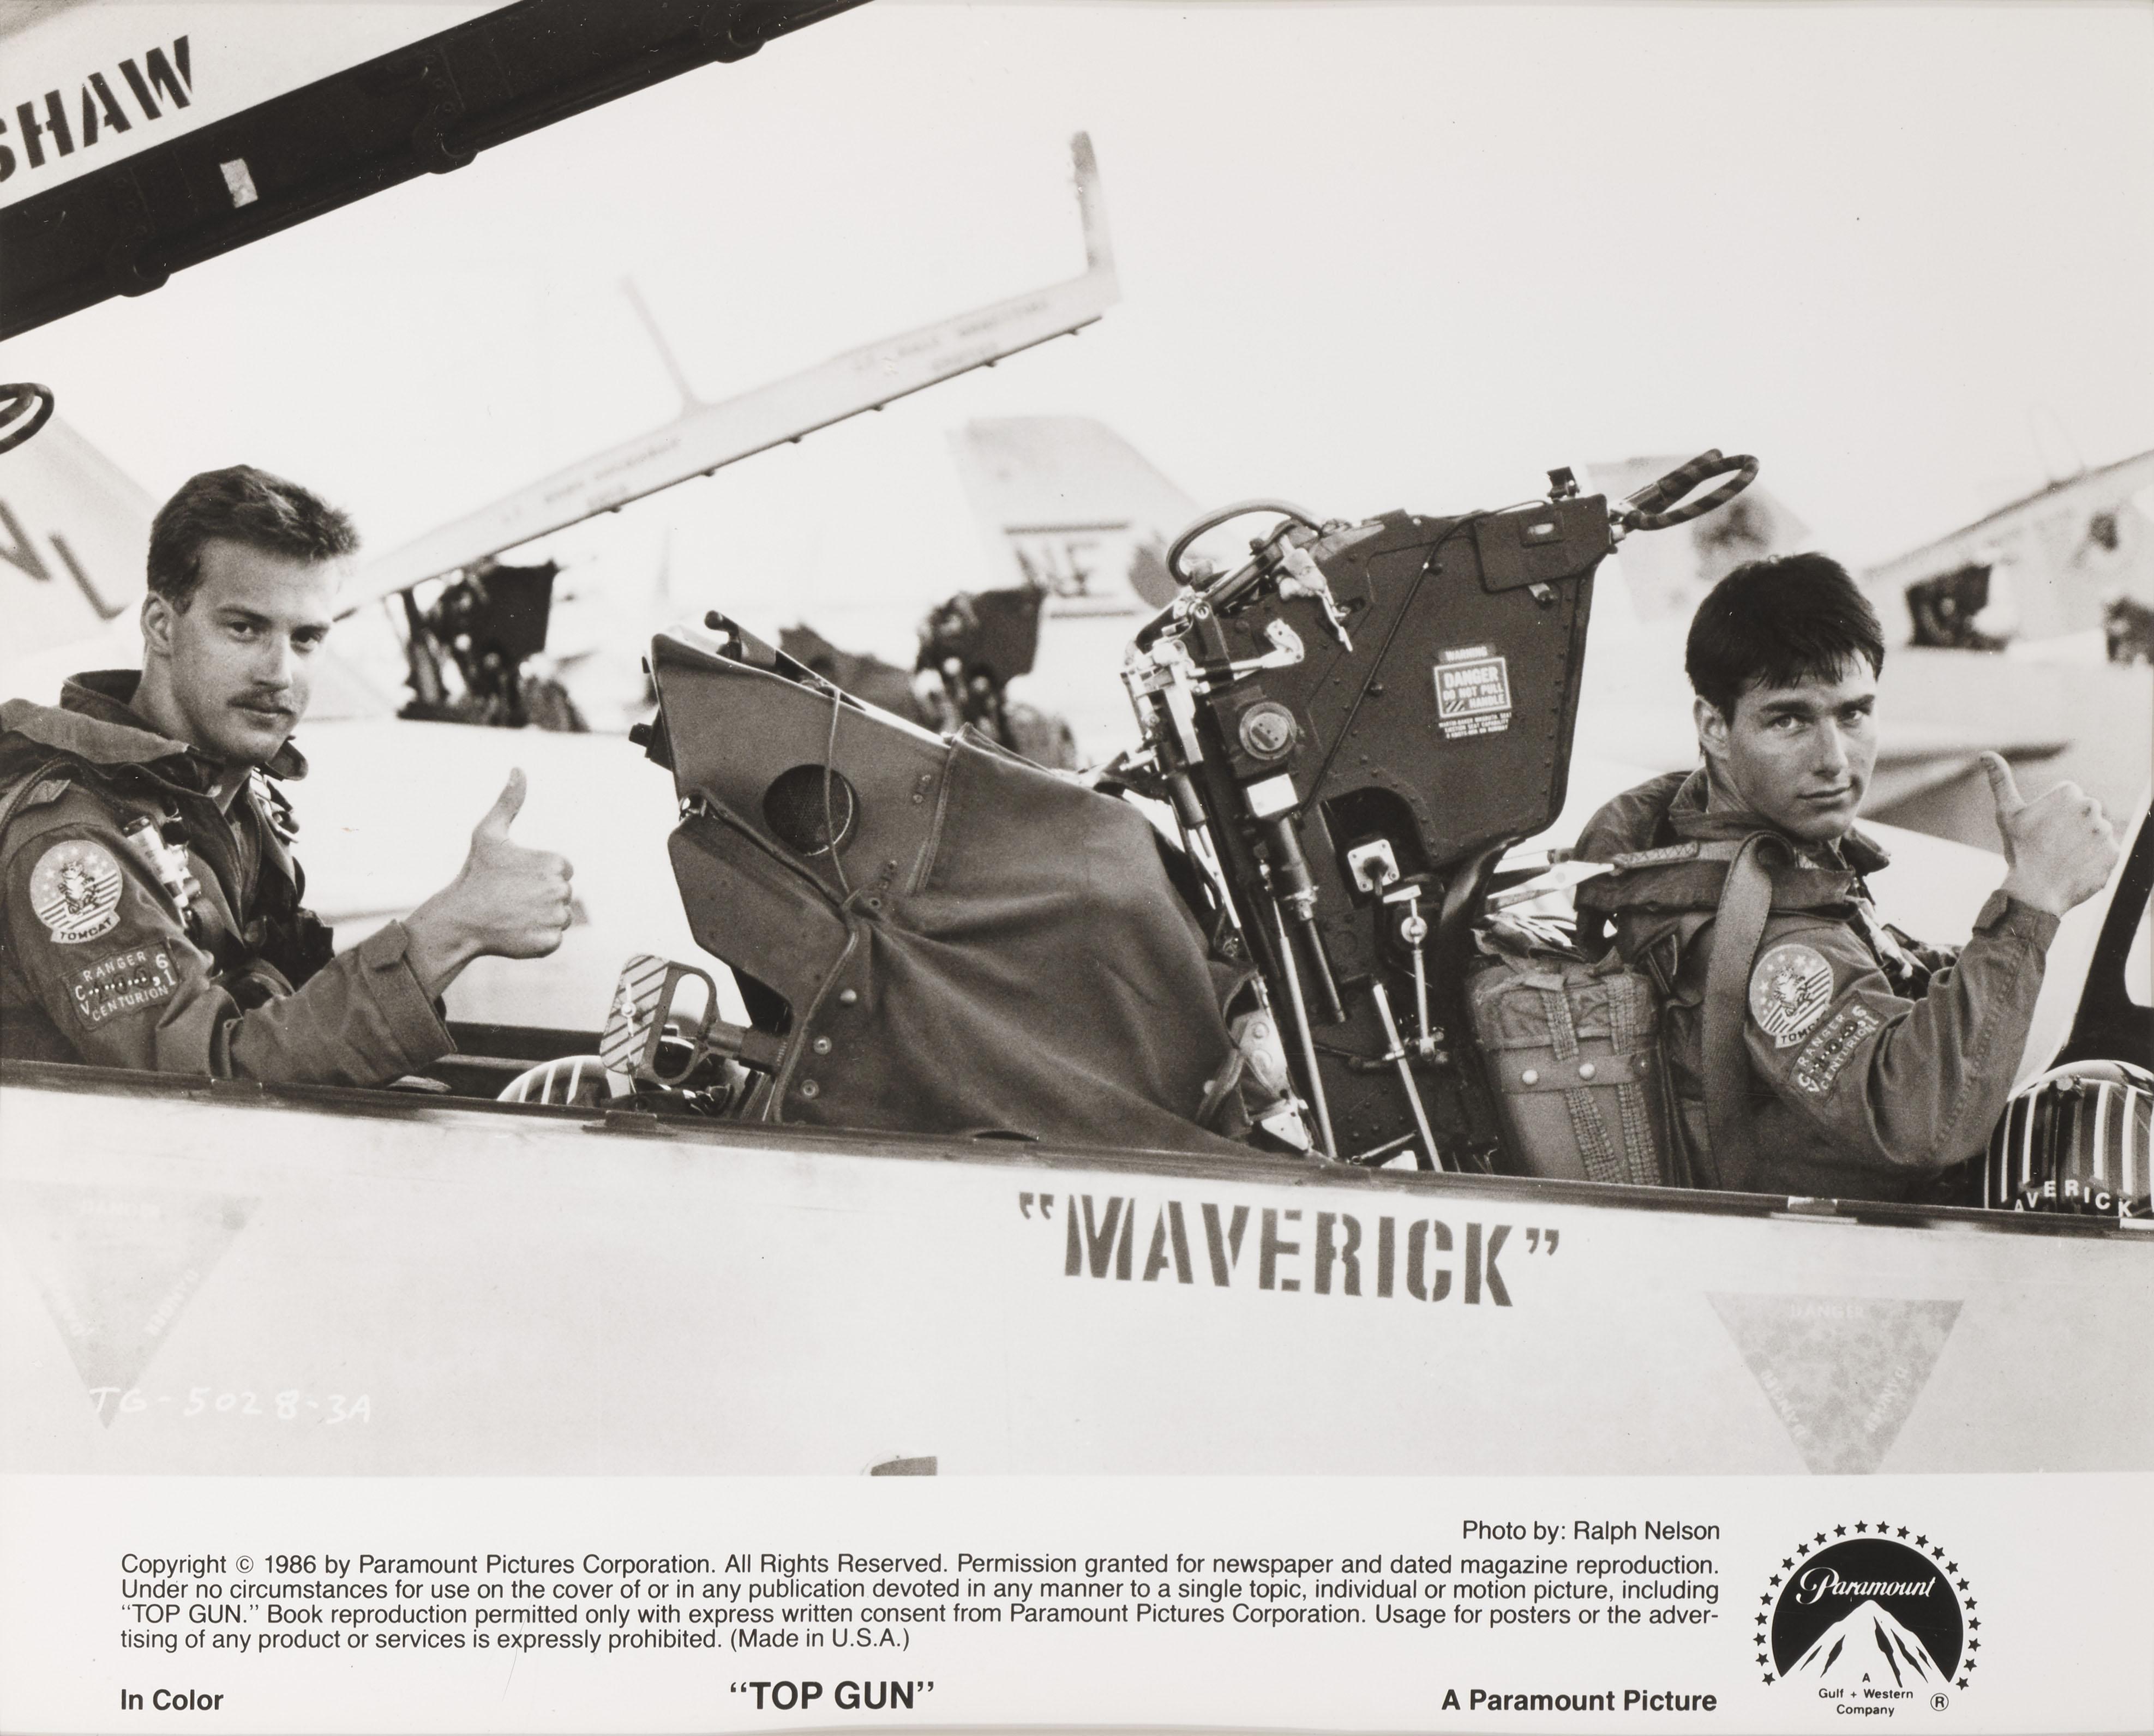 Original American photographic production still for the 1986 Blockbuster Top Gun starring Tom Cruise, Kelly McGillis, Tim Robbins, Val Kilmer and Michael Ironside.
This film was directed by Tony Scott.
This piece is conservation framed with UV